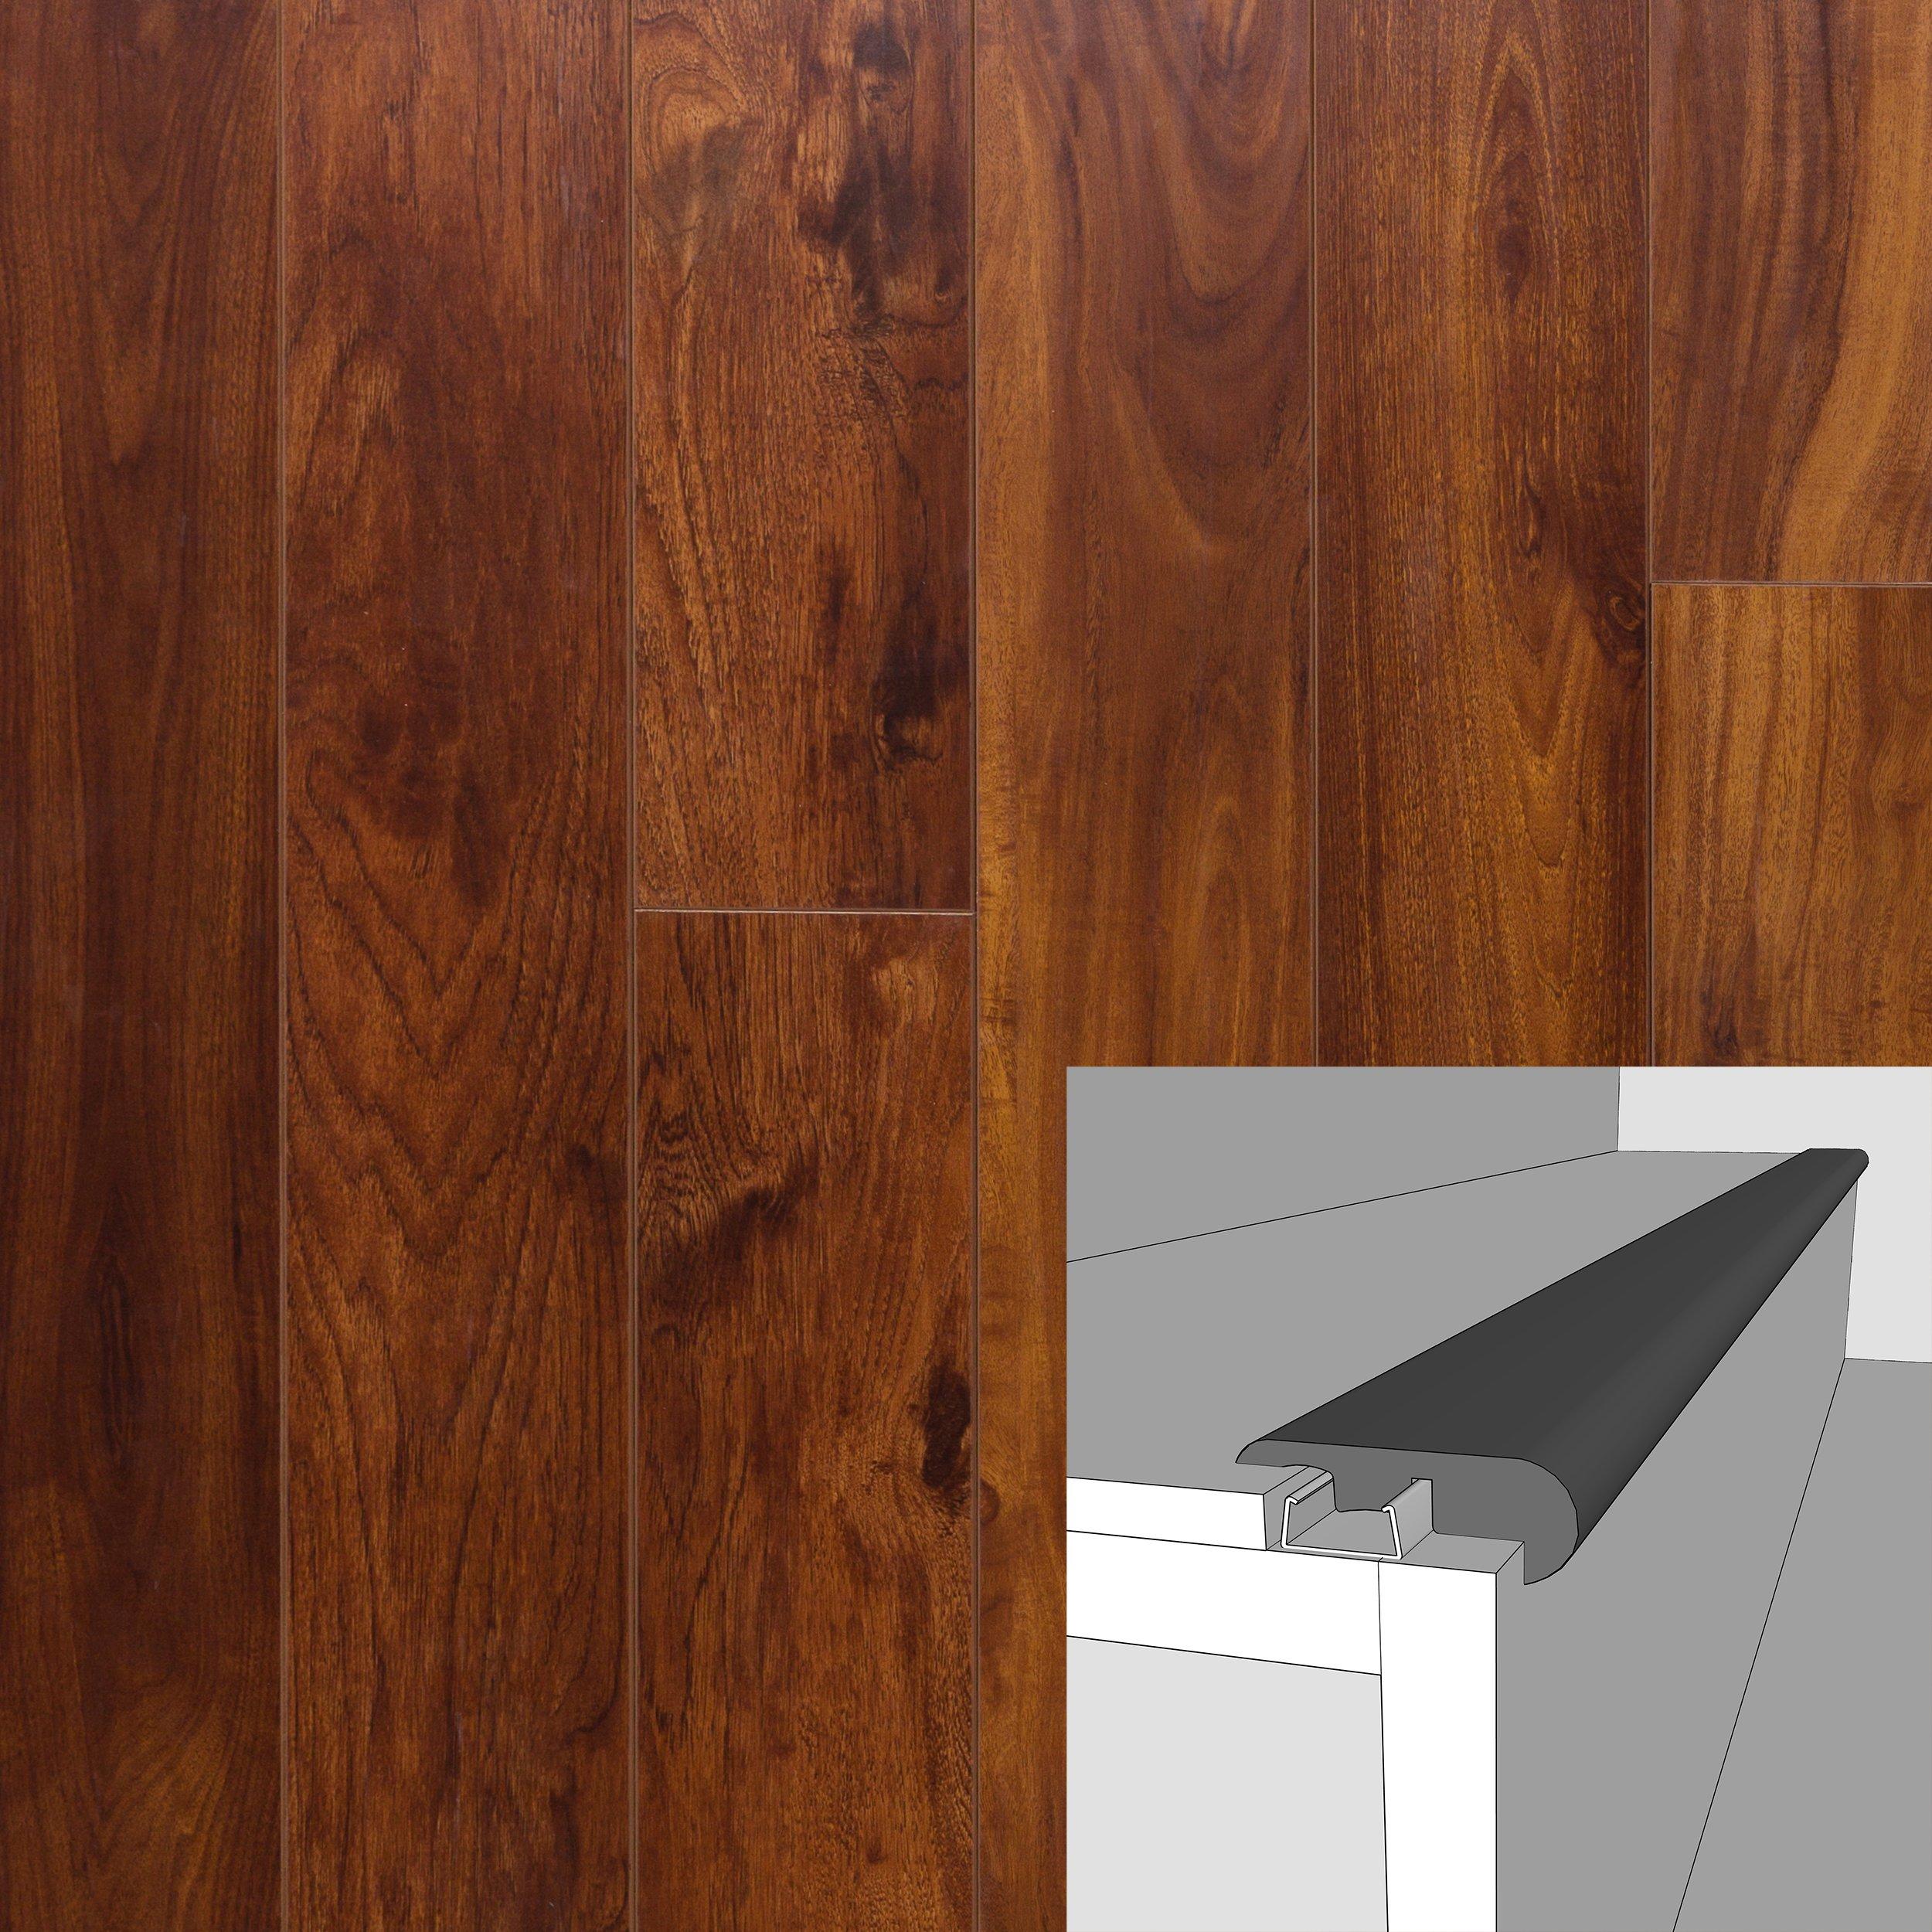 Rosewood 94in. Laminate Overlapping Stair Nose